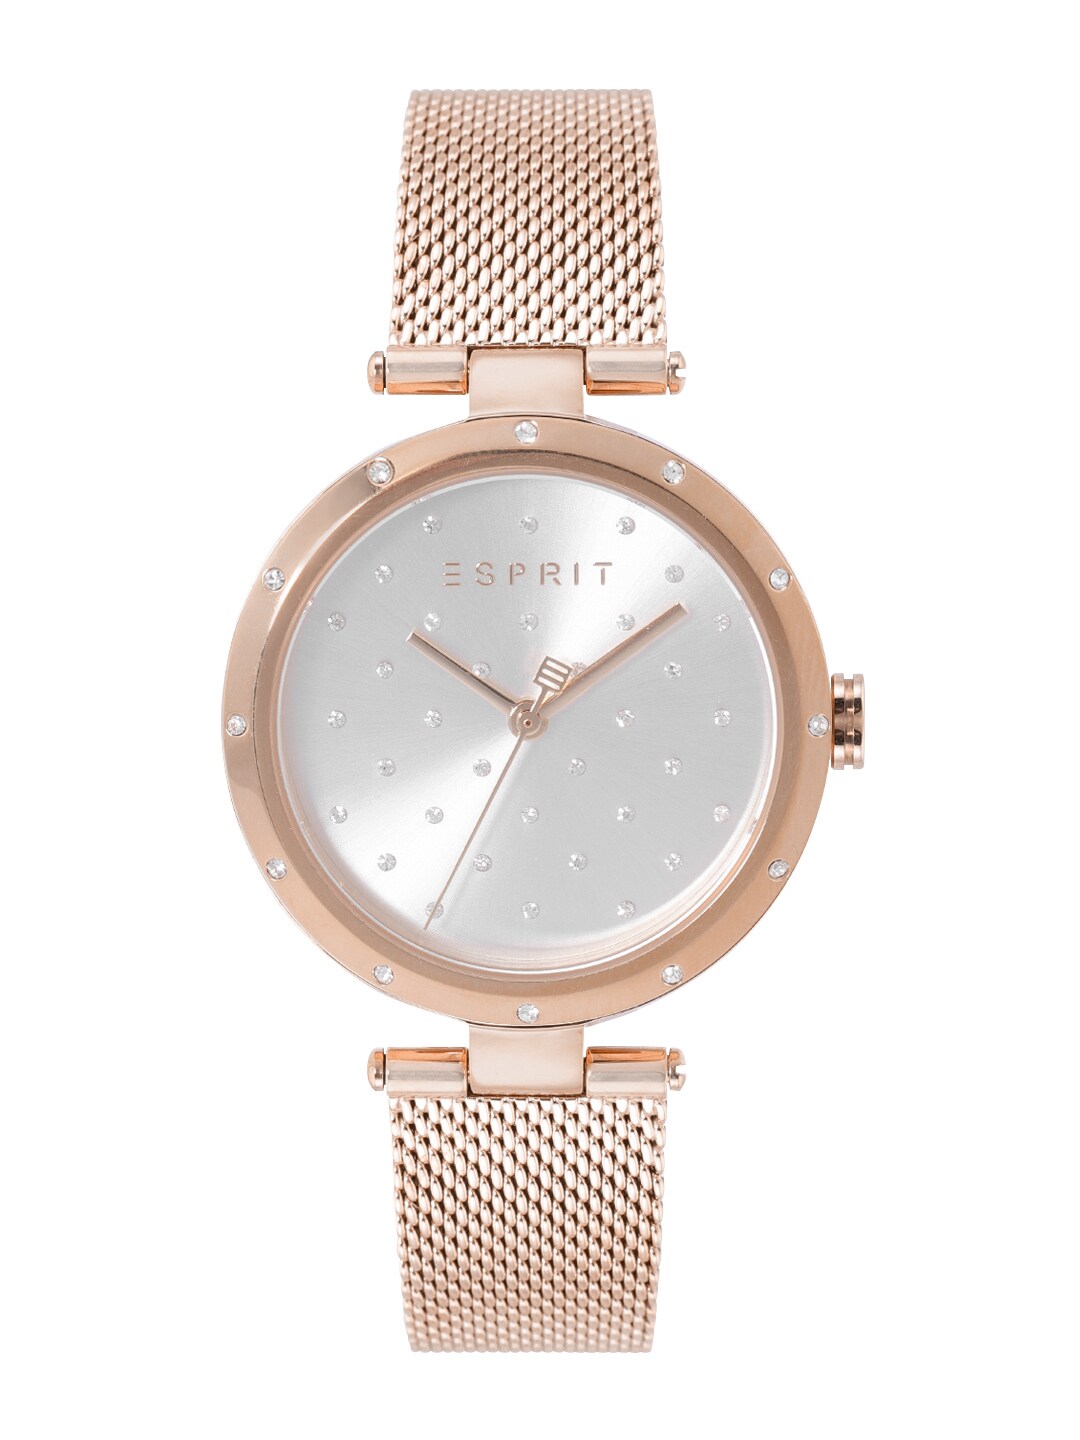 ESPRIT Women Silver-Toned Embellished Dial & Bracelet Straps Analogue Watch ES1L214M0075 Price in India